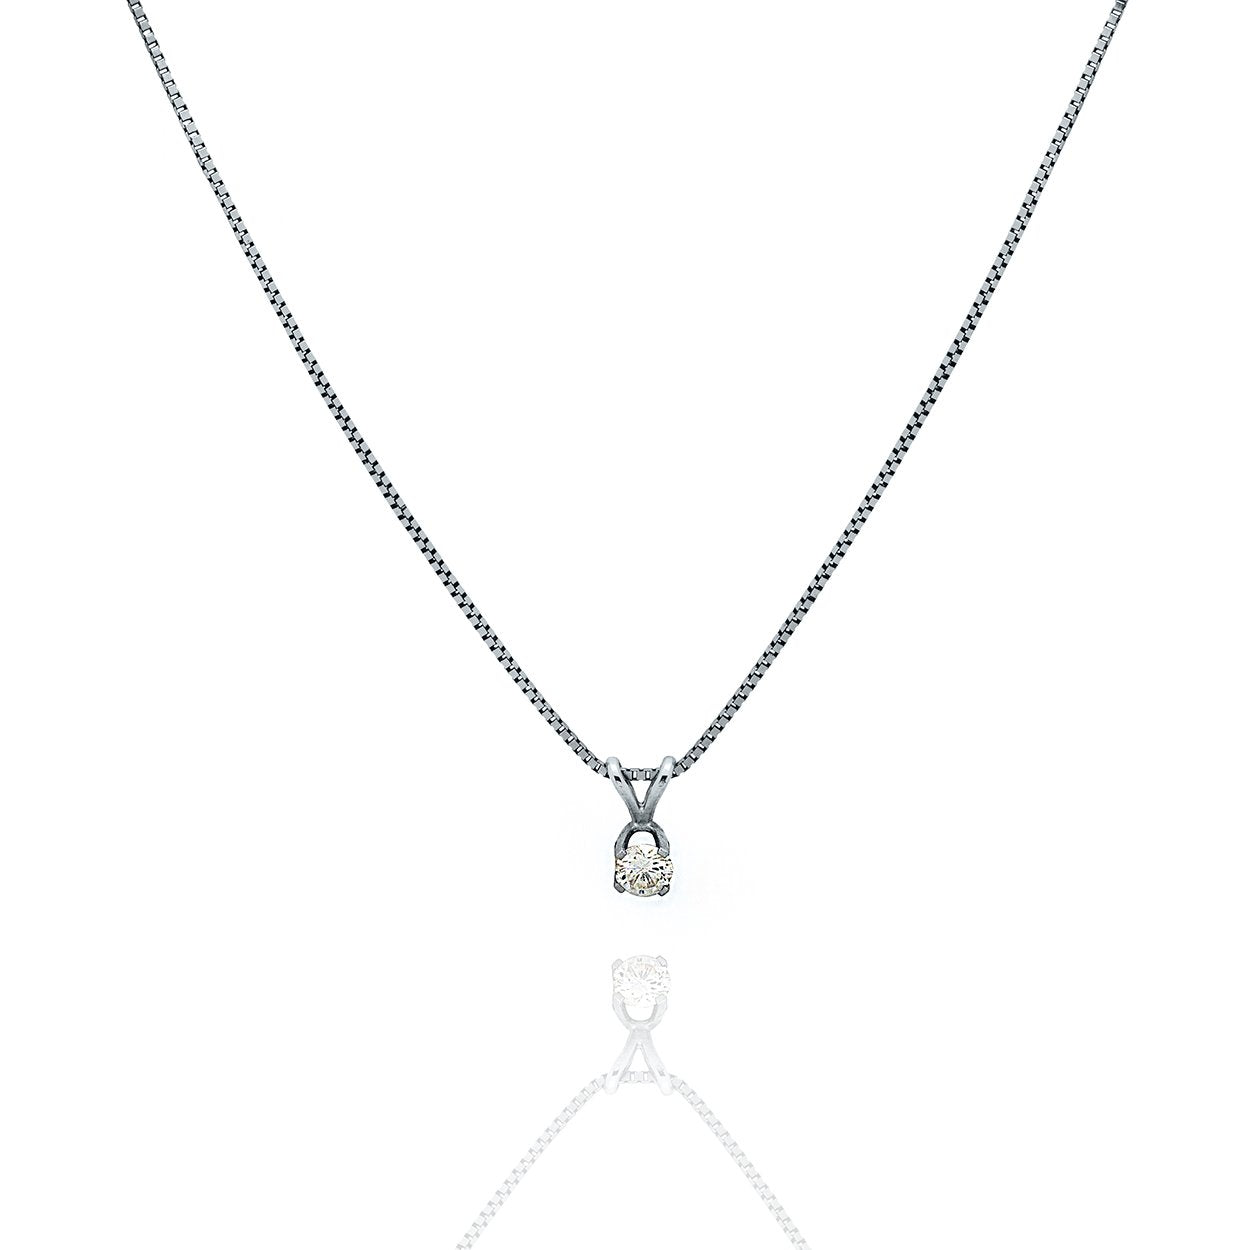 14kt White Gold Box Chain and Diamond Pendant Necklace Set